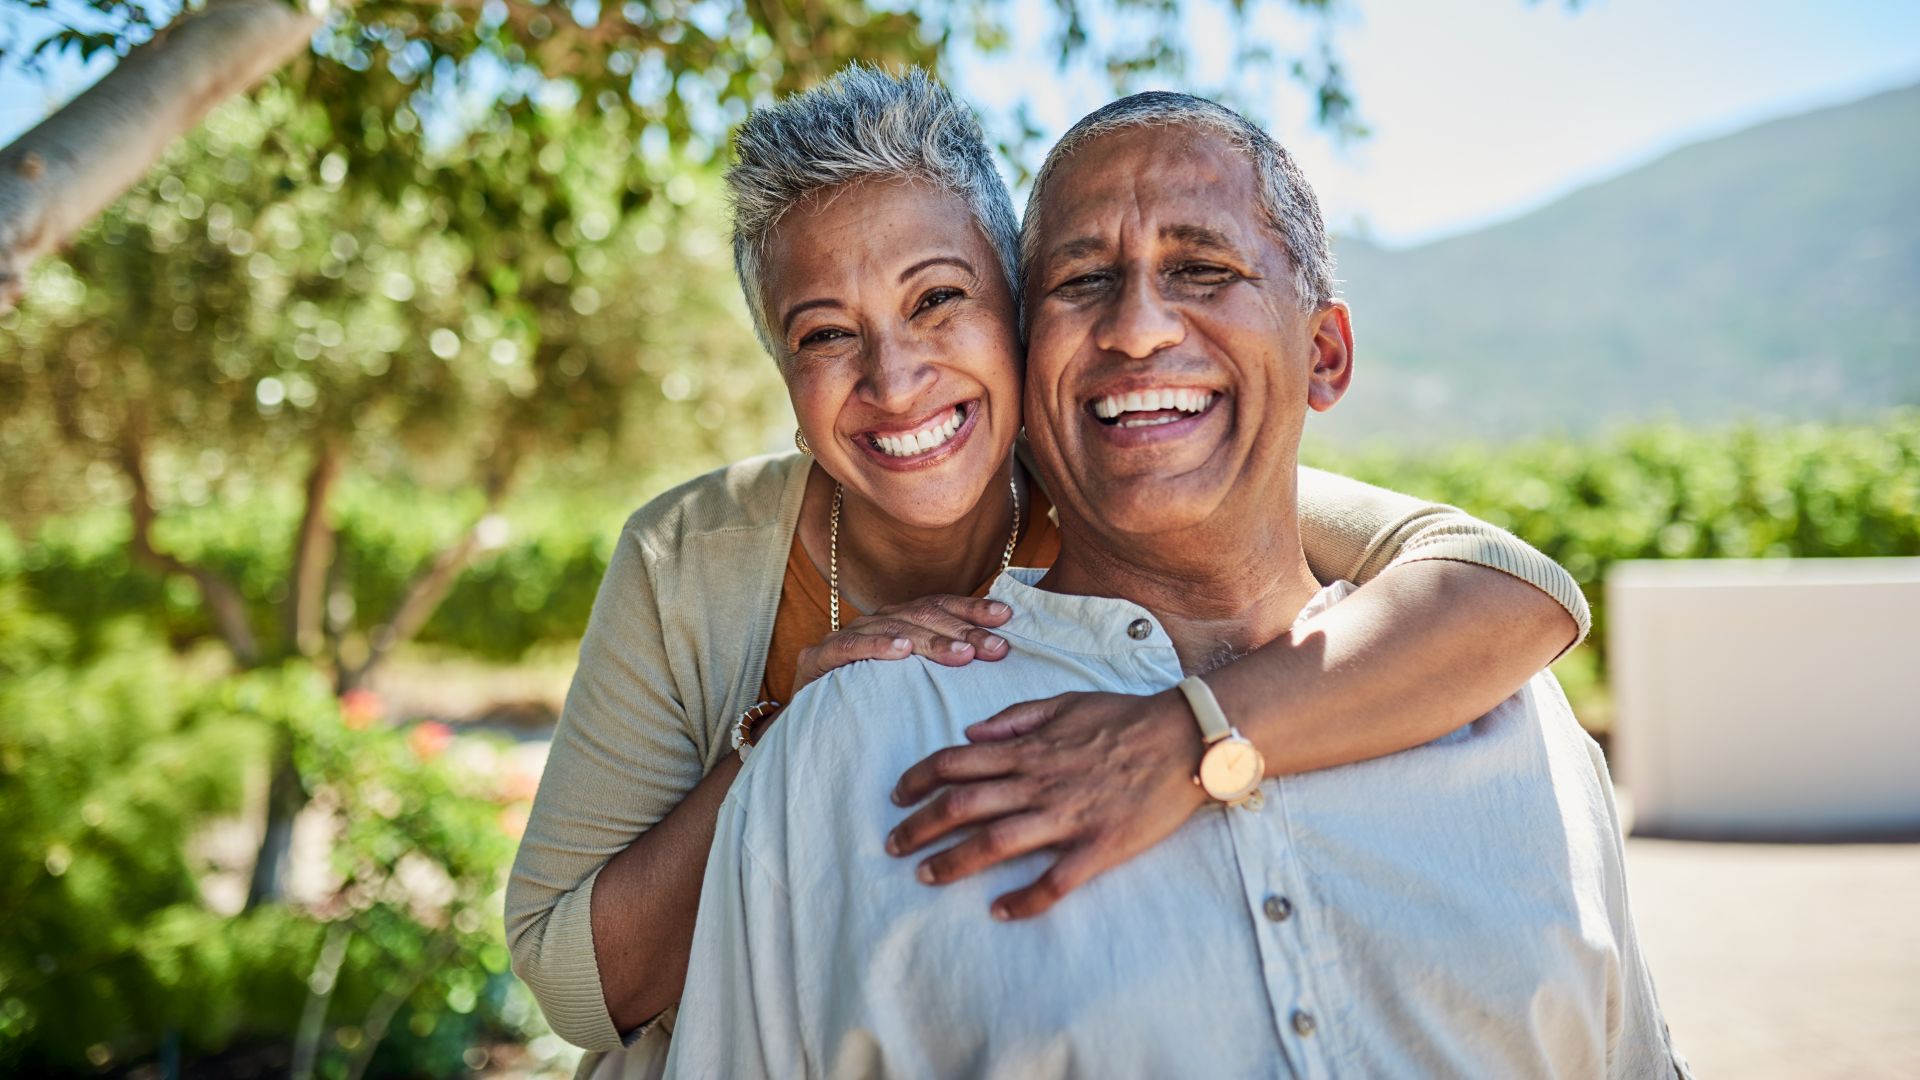 Senior couple, smile and outdoor in nature park showing love, care and happy on a retirement holiday on summer day. Portrait of elderly man and woman together for fresh air and tree view on vacation